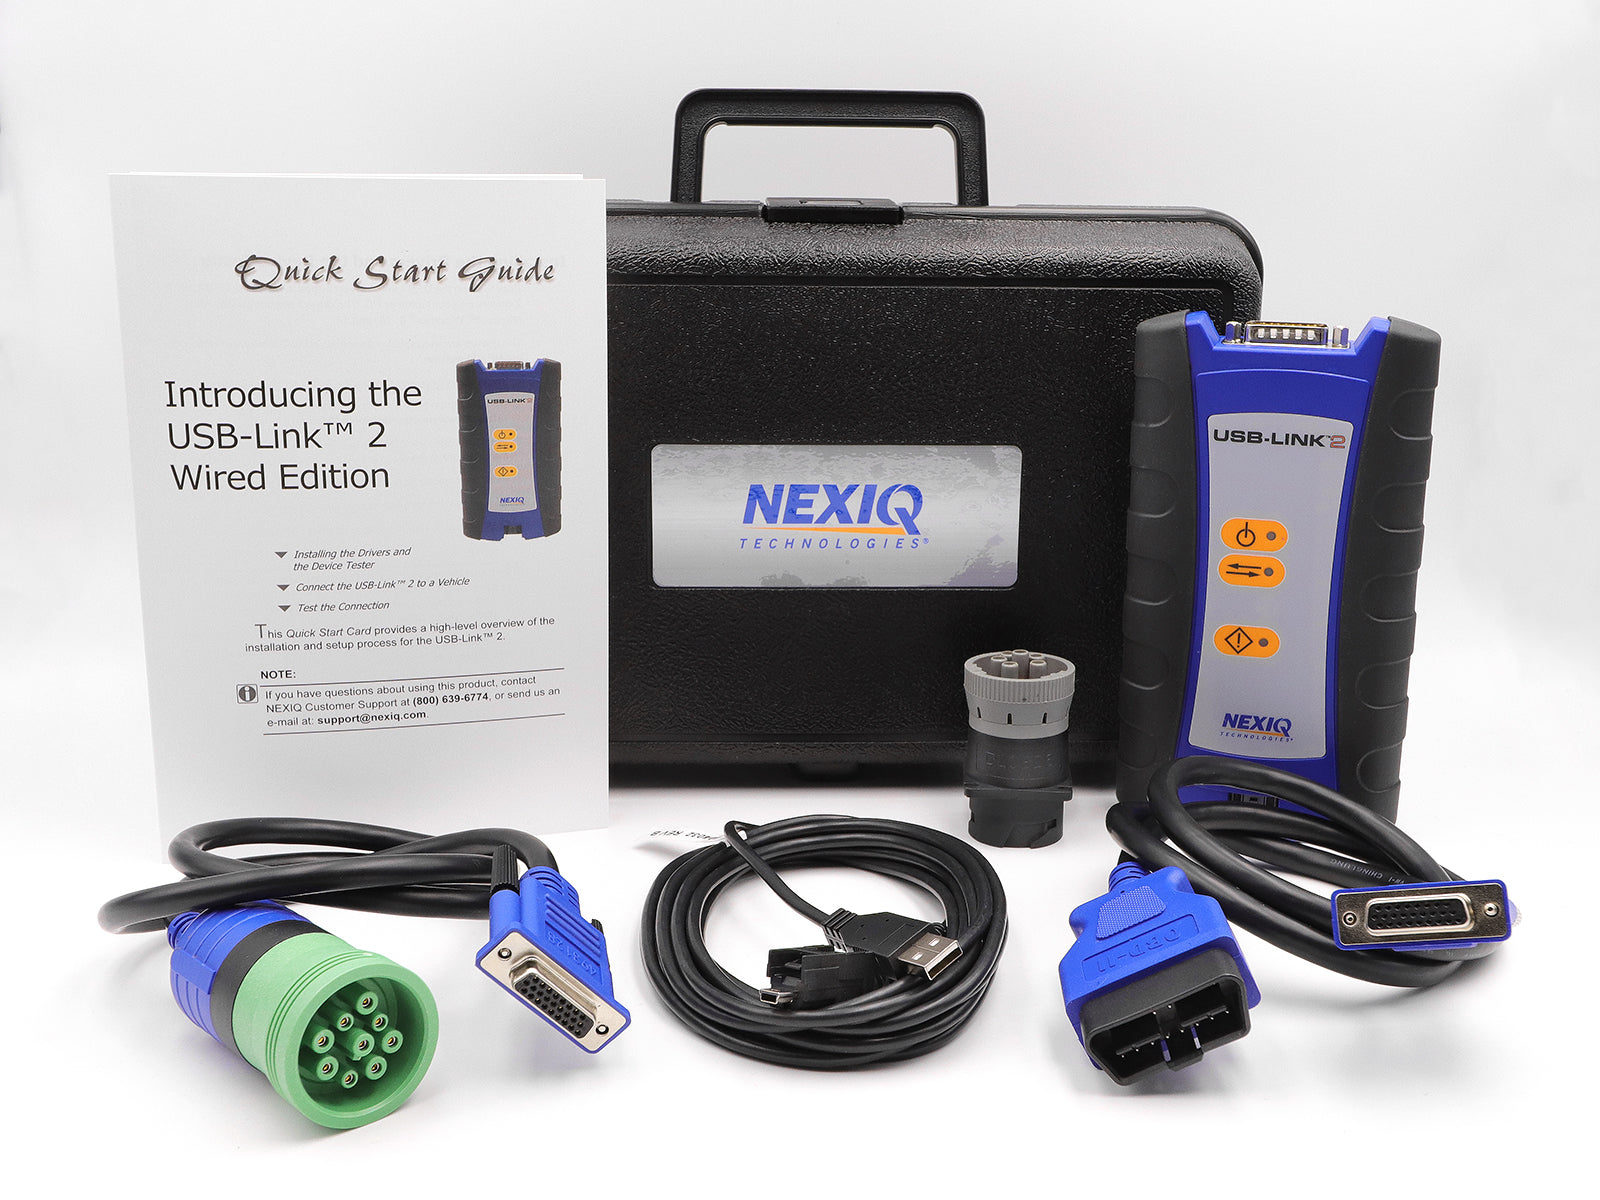 Nexiq USB Link 2 Wired Edition with Diagnostic Software and Repair Information